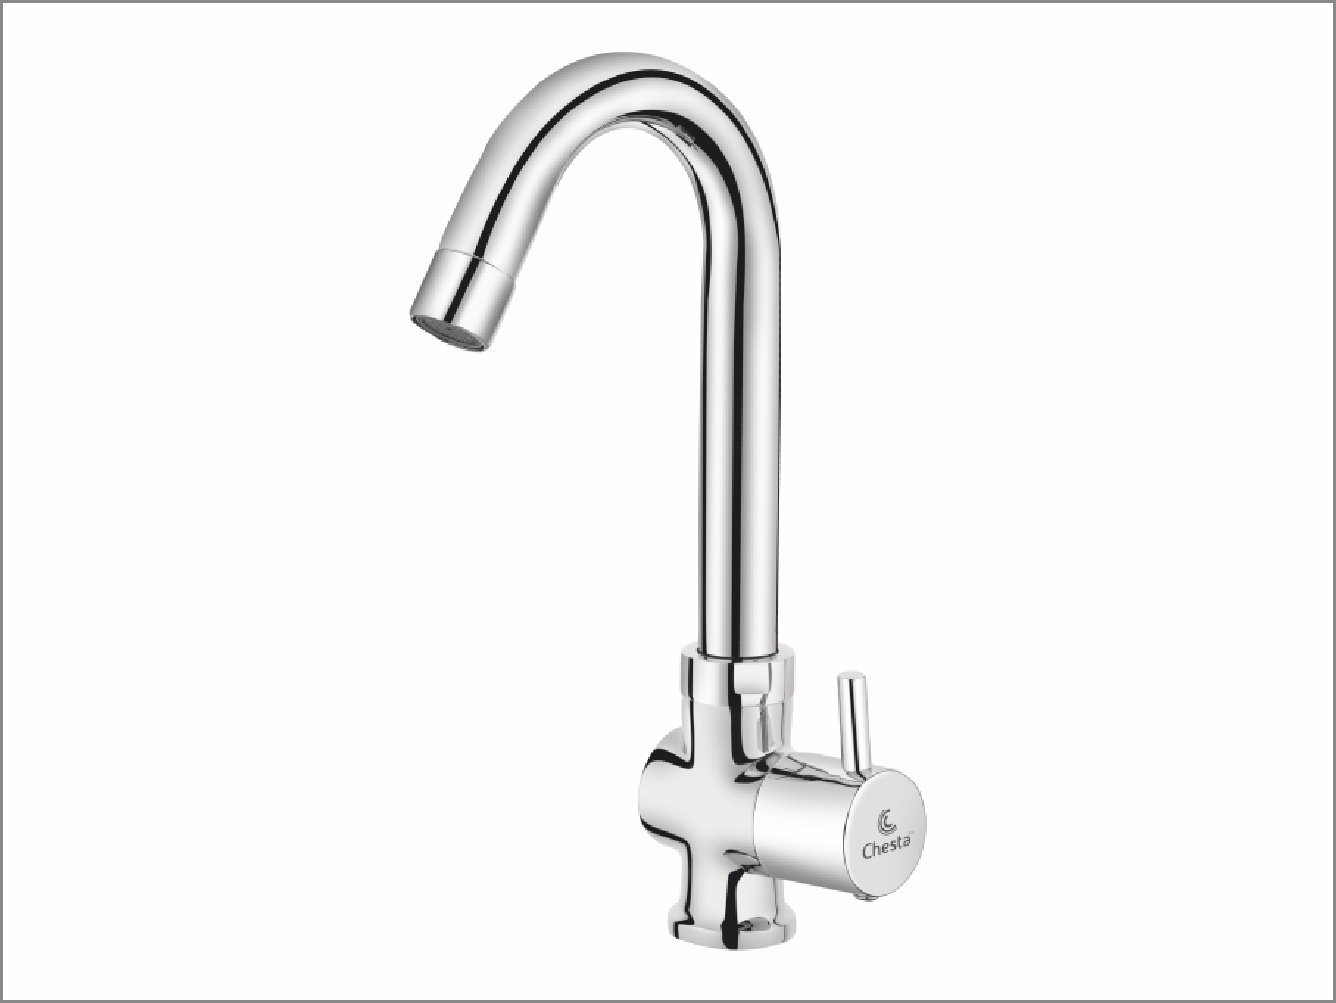 SA - 1007 - Swan Neck Faucets by Chesta Bath Fittings